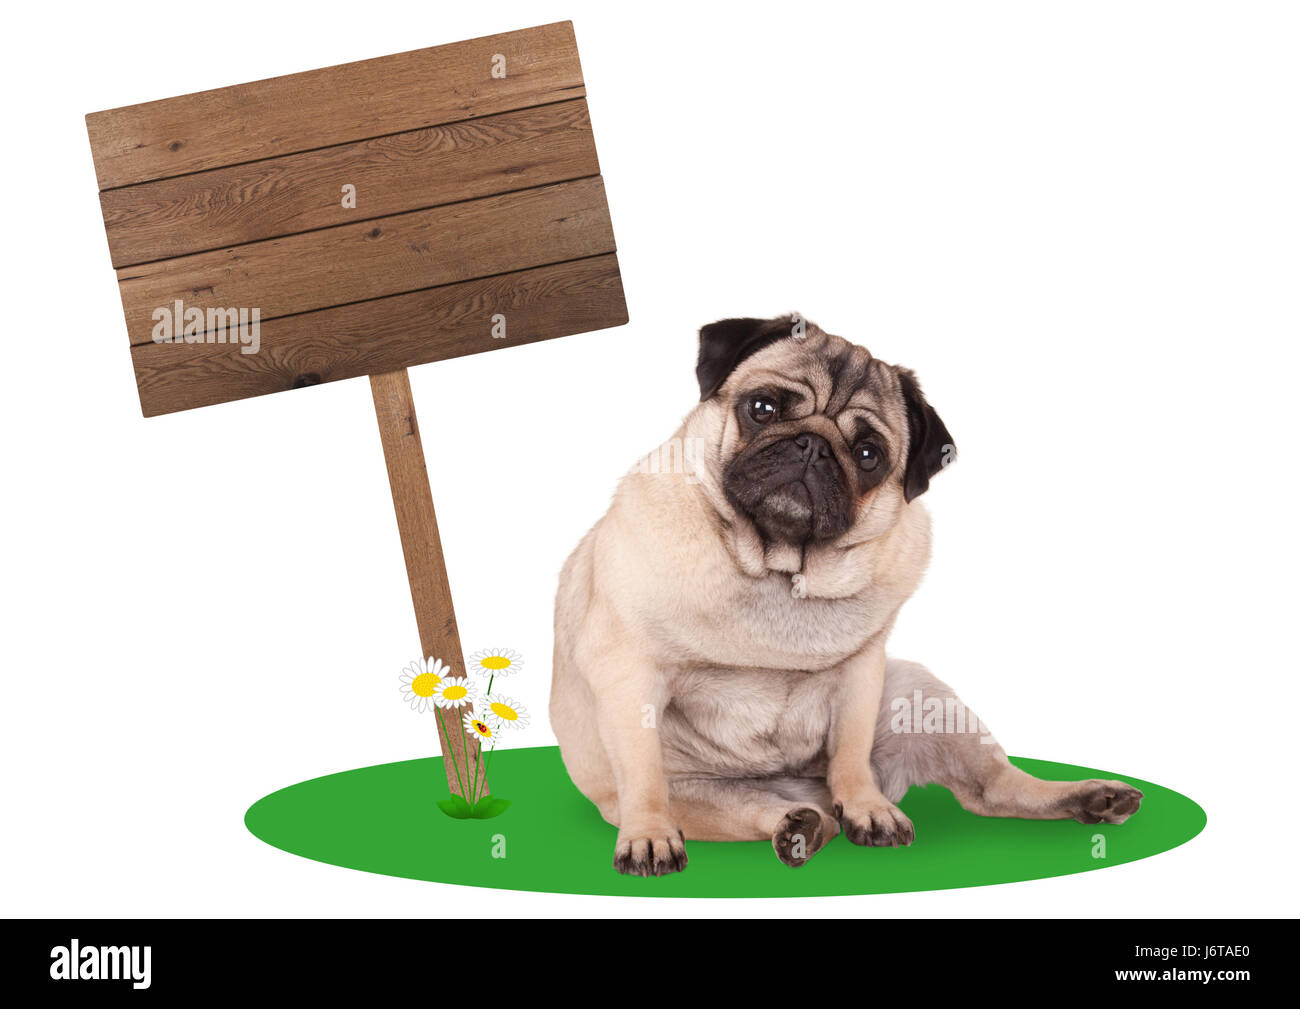 sweet cute pug puppy dog sitting down next to blank wooden board sign on pole, isolated on white background Stock Photo